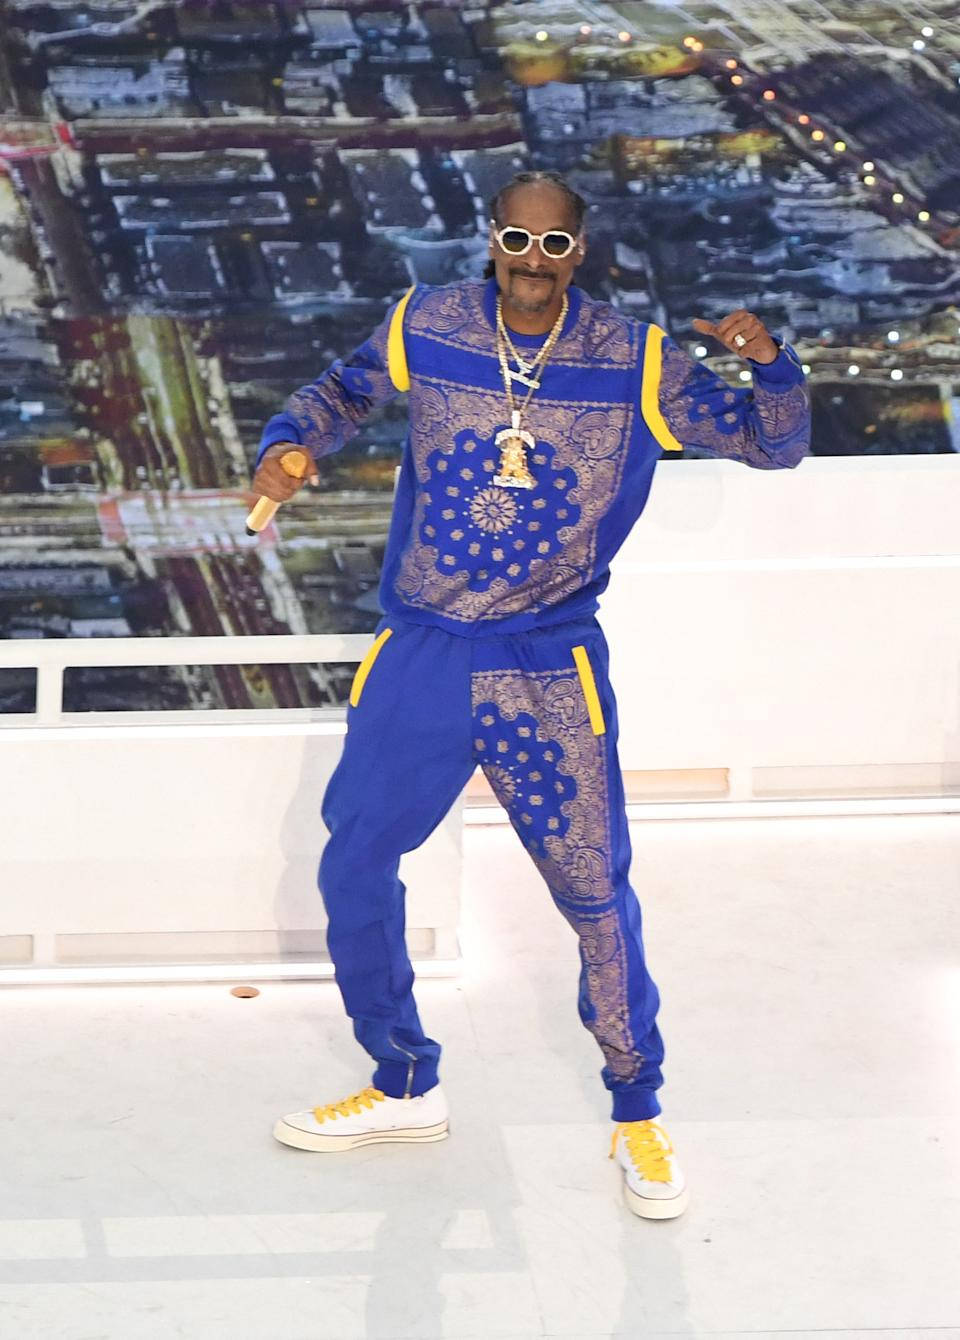 Blue Bandana Outfit Of Snoop Dogg Background